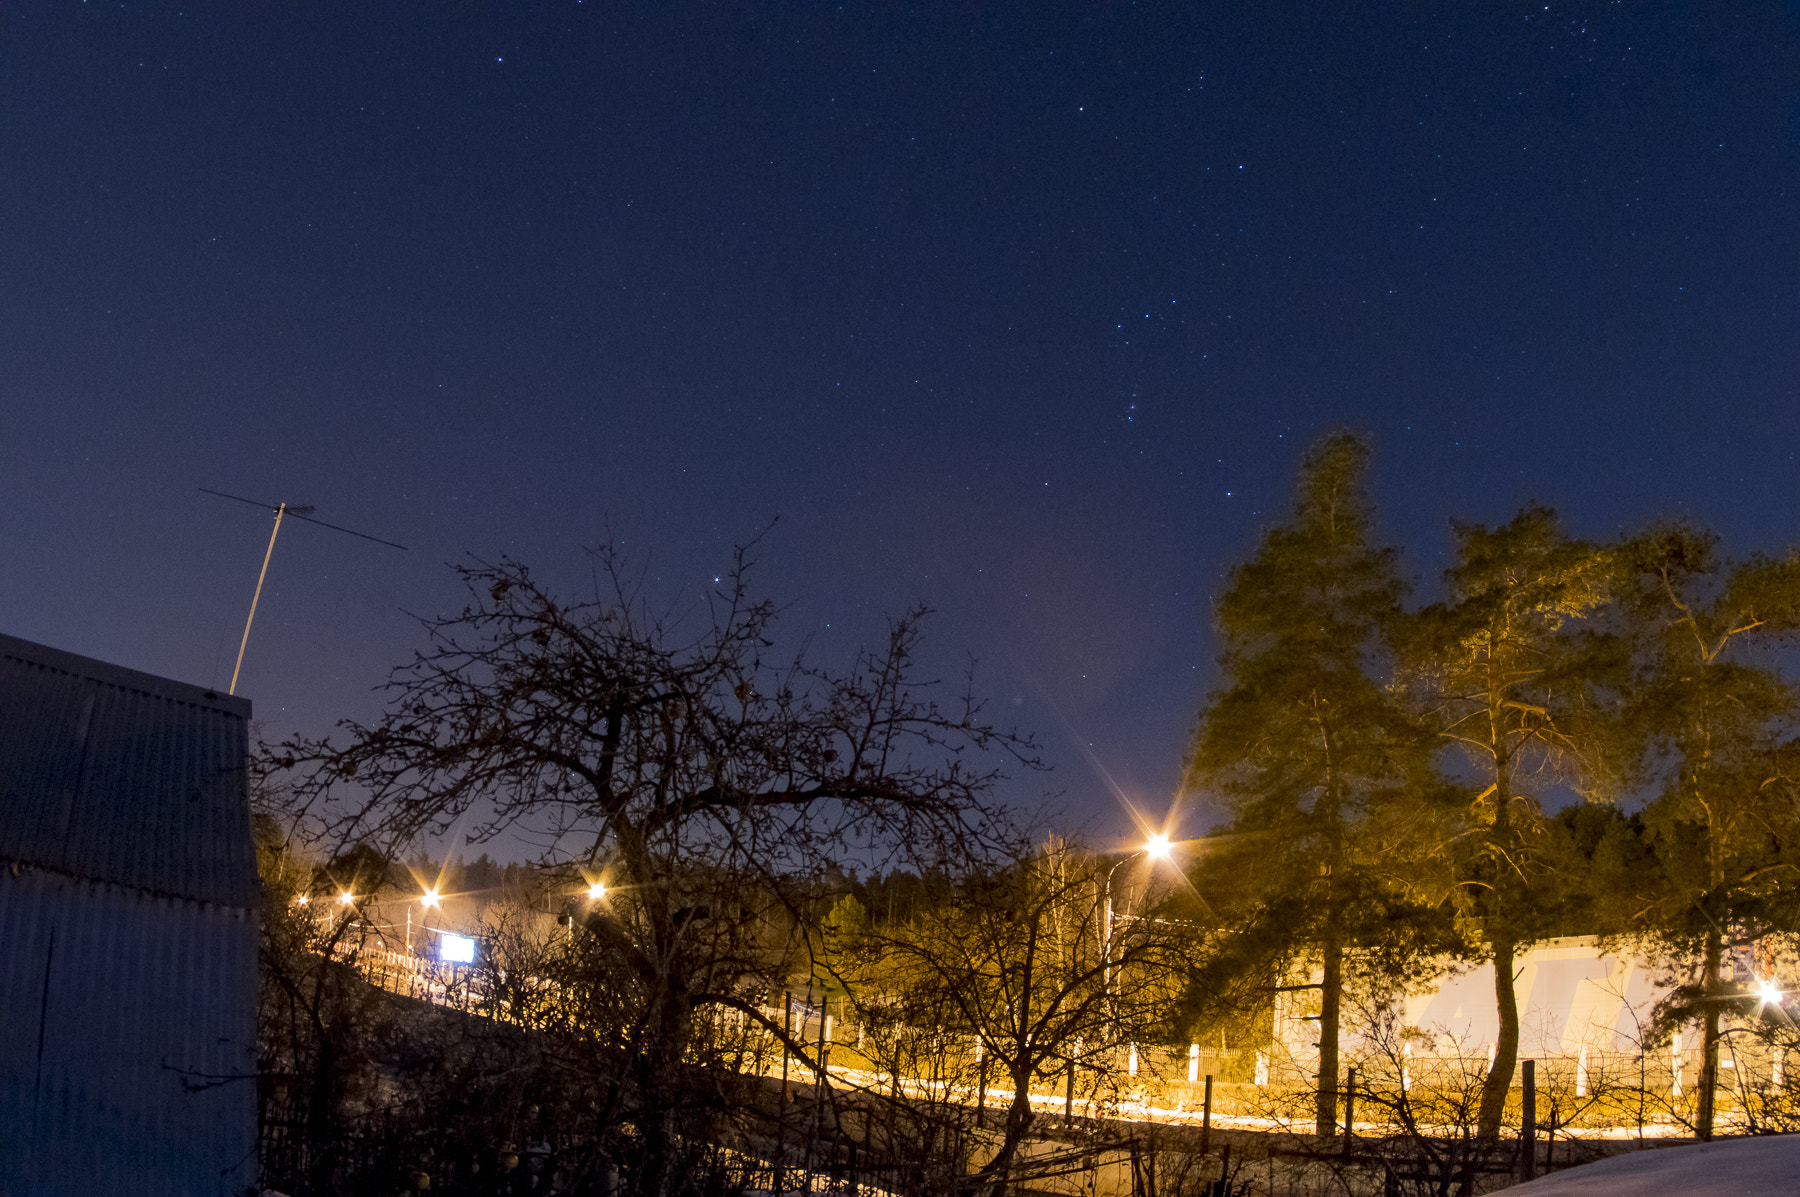 Pentax K-3 sample photo. Orion above the city photography